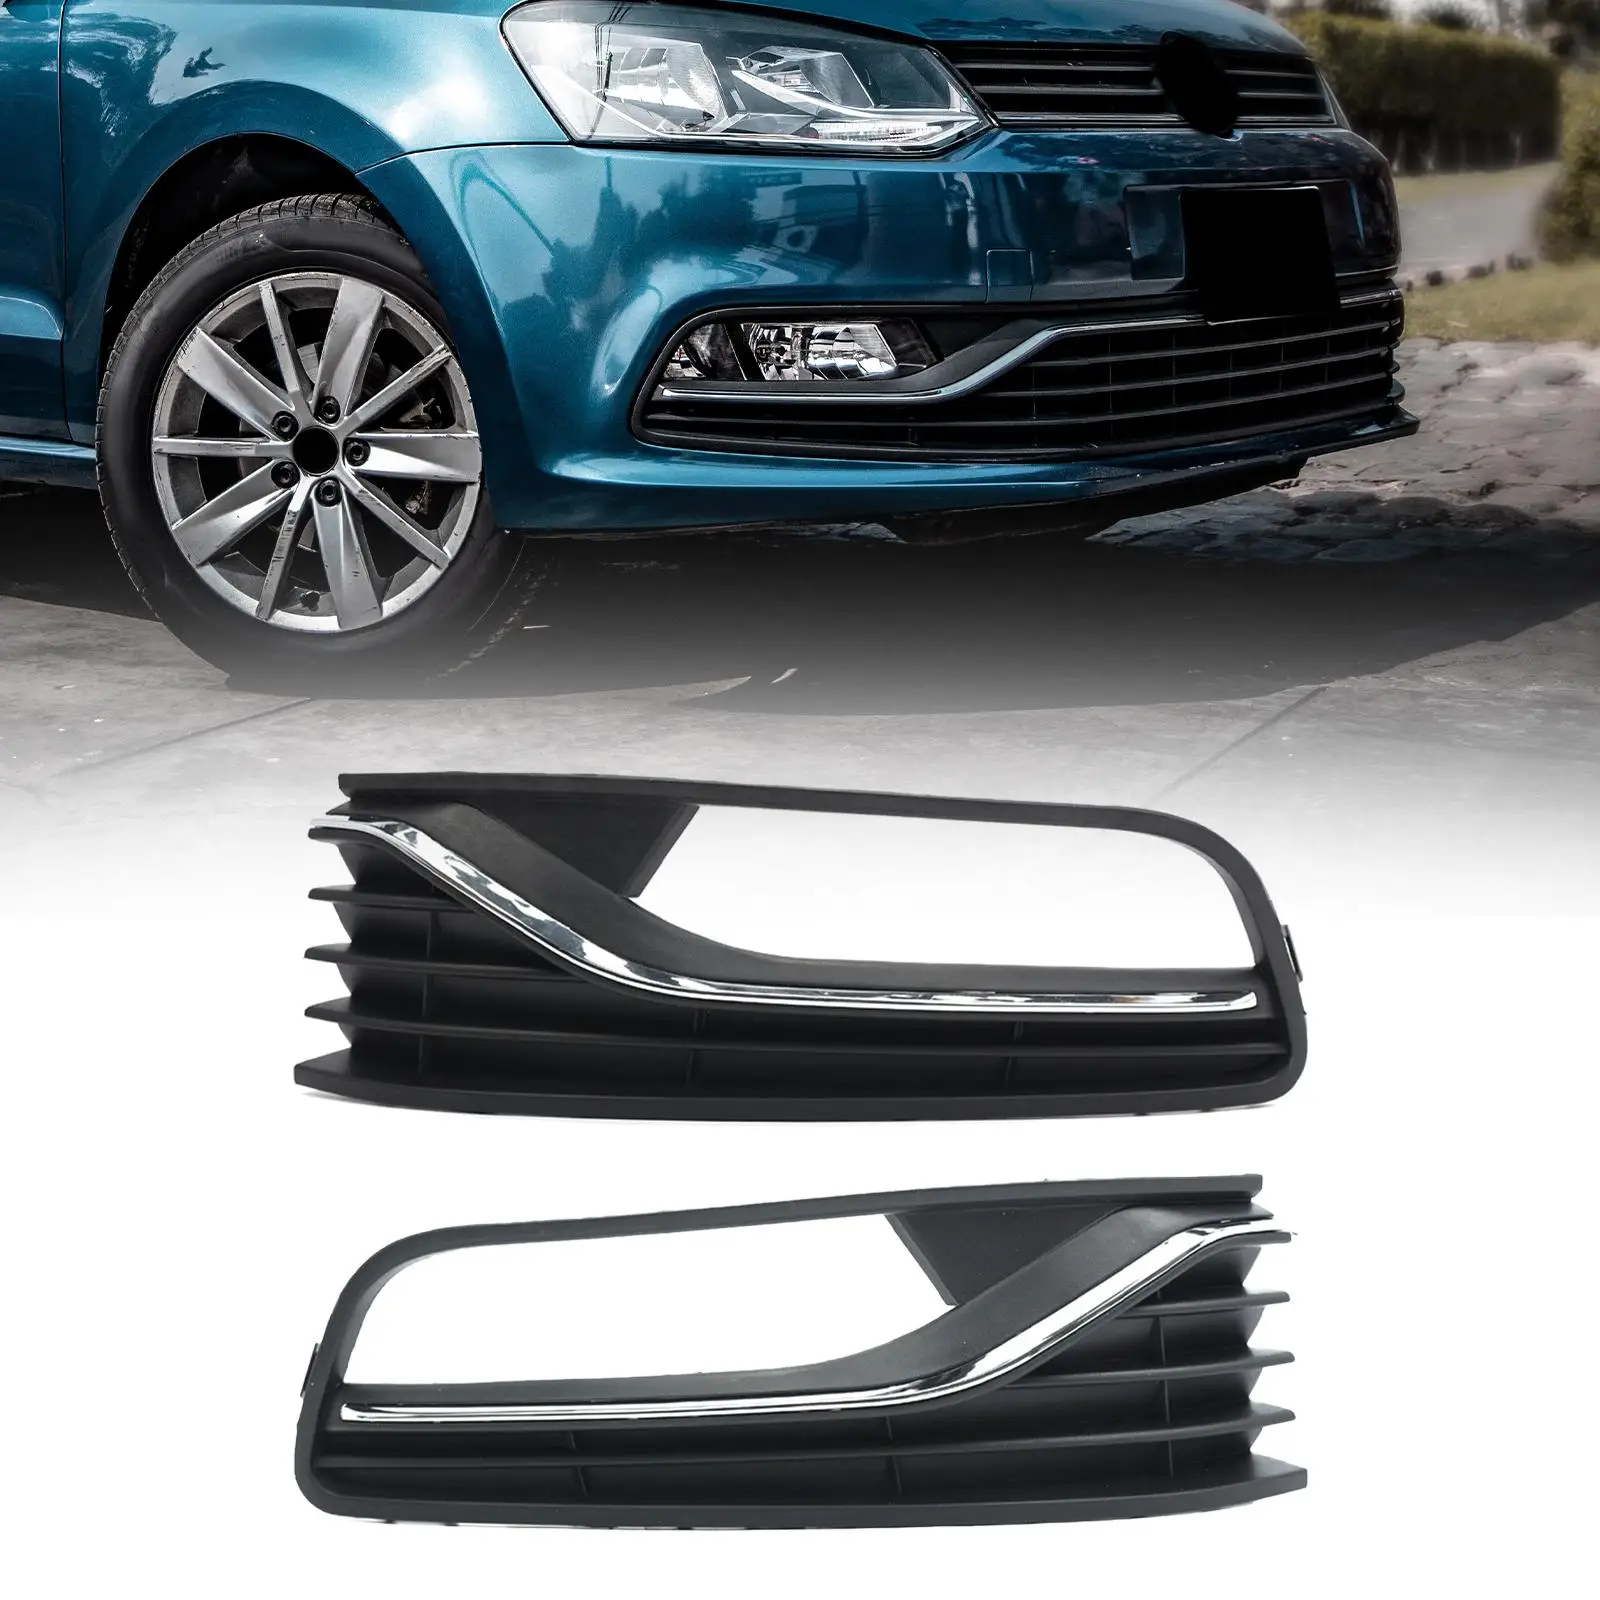 Fog Light grill cover Wear Resistant Front Bumper Fog Light Grill for VW Polo 6R 2014-2017 Replacement Parts Refitting